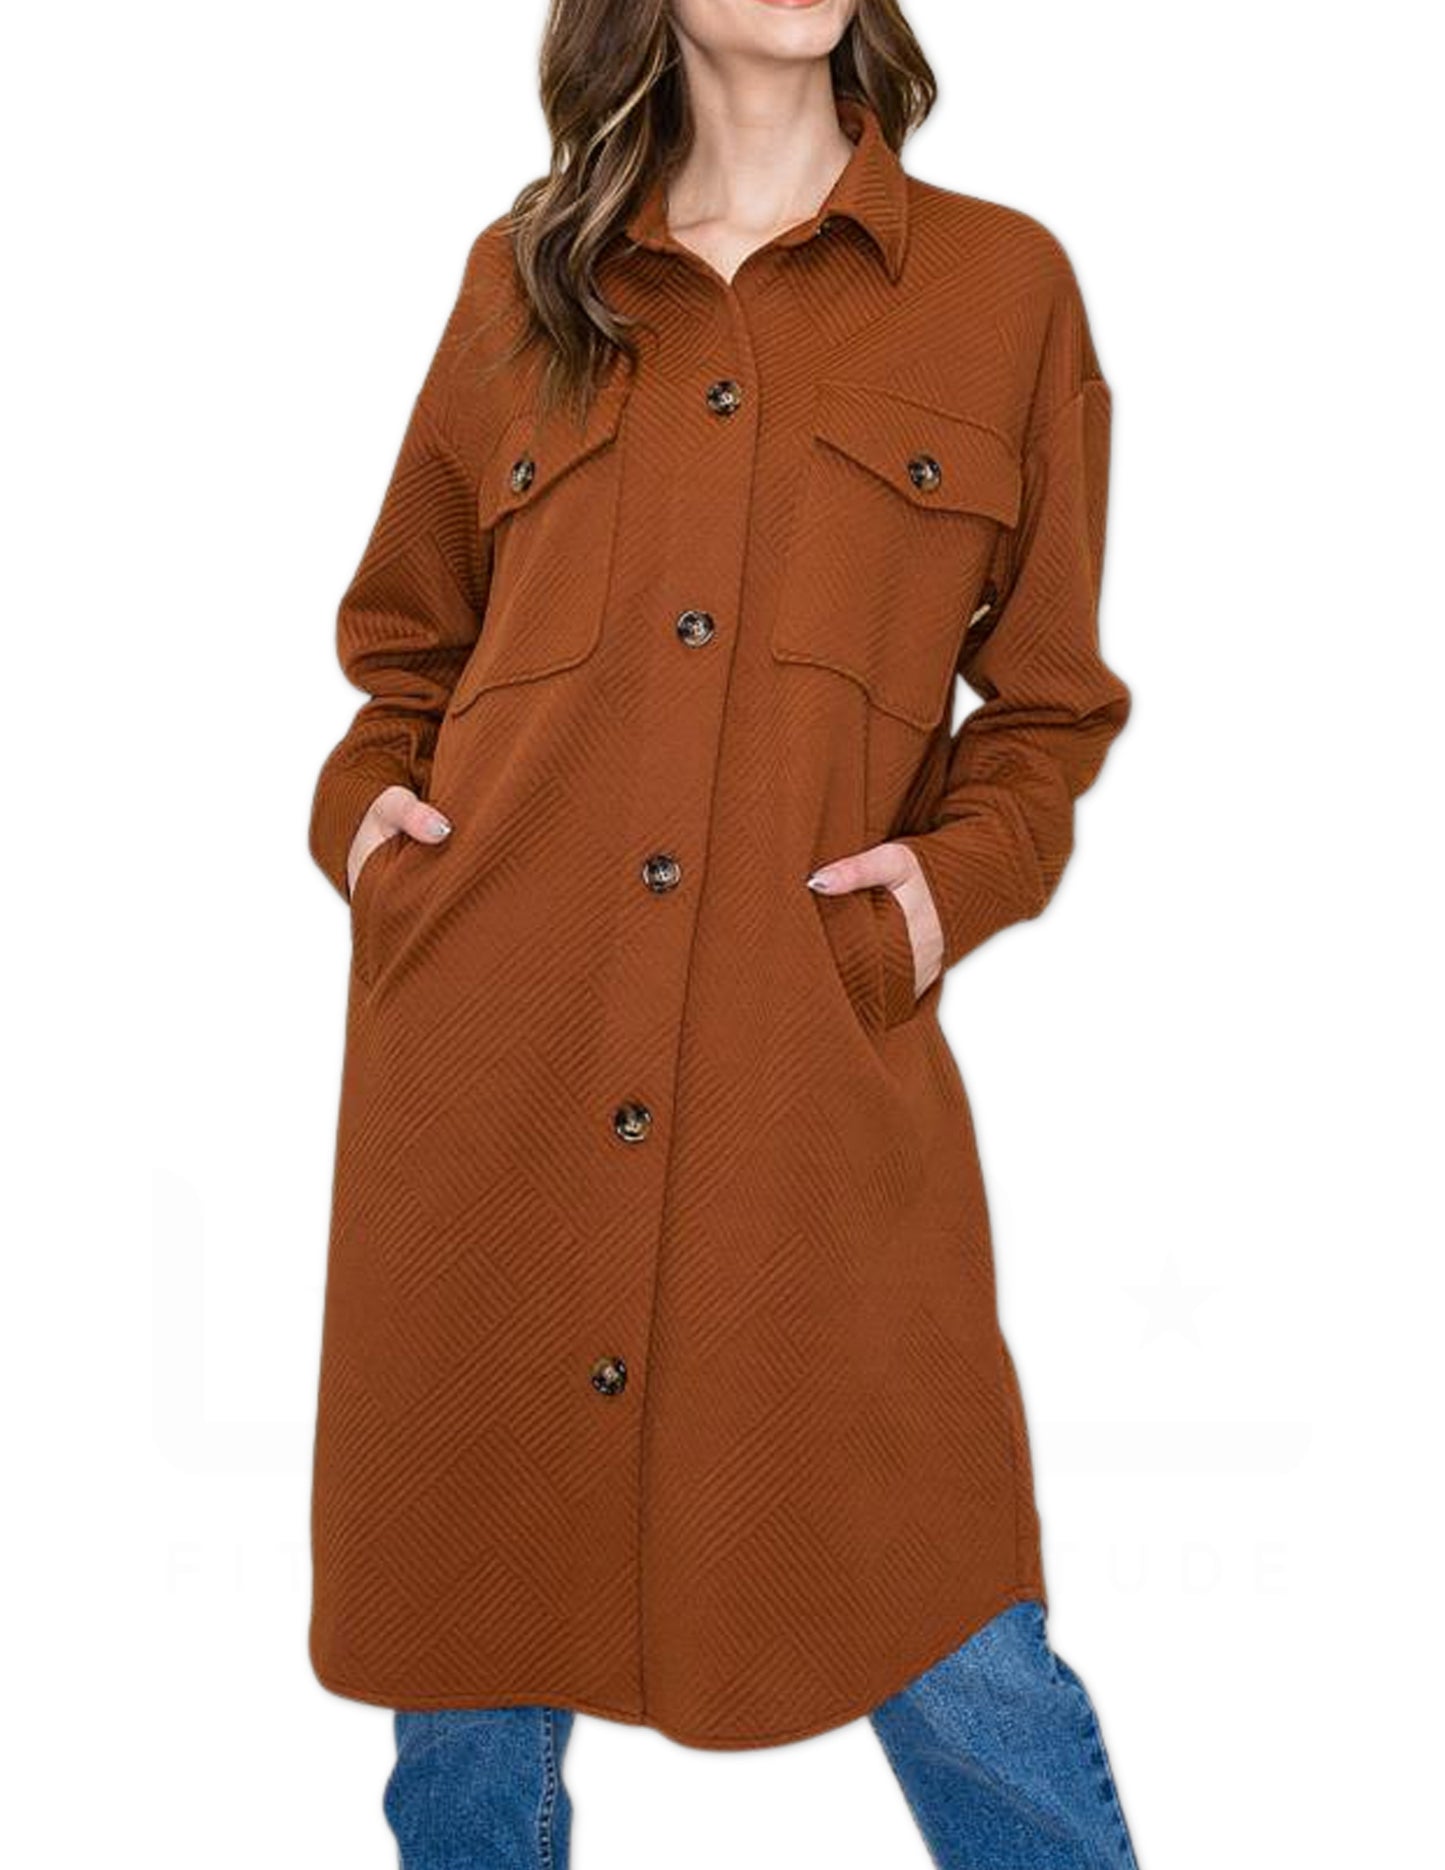 Collared Long Duster Jacket - Copper